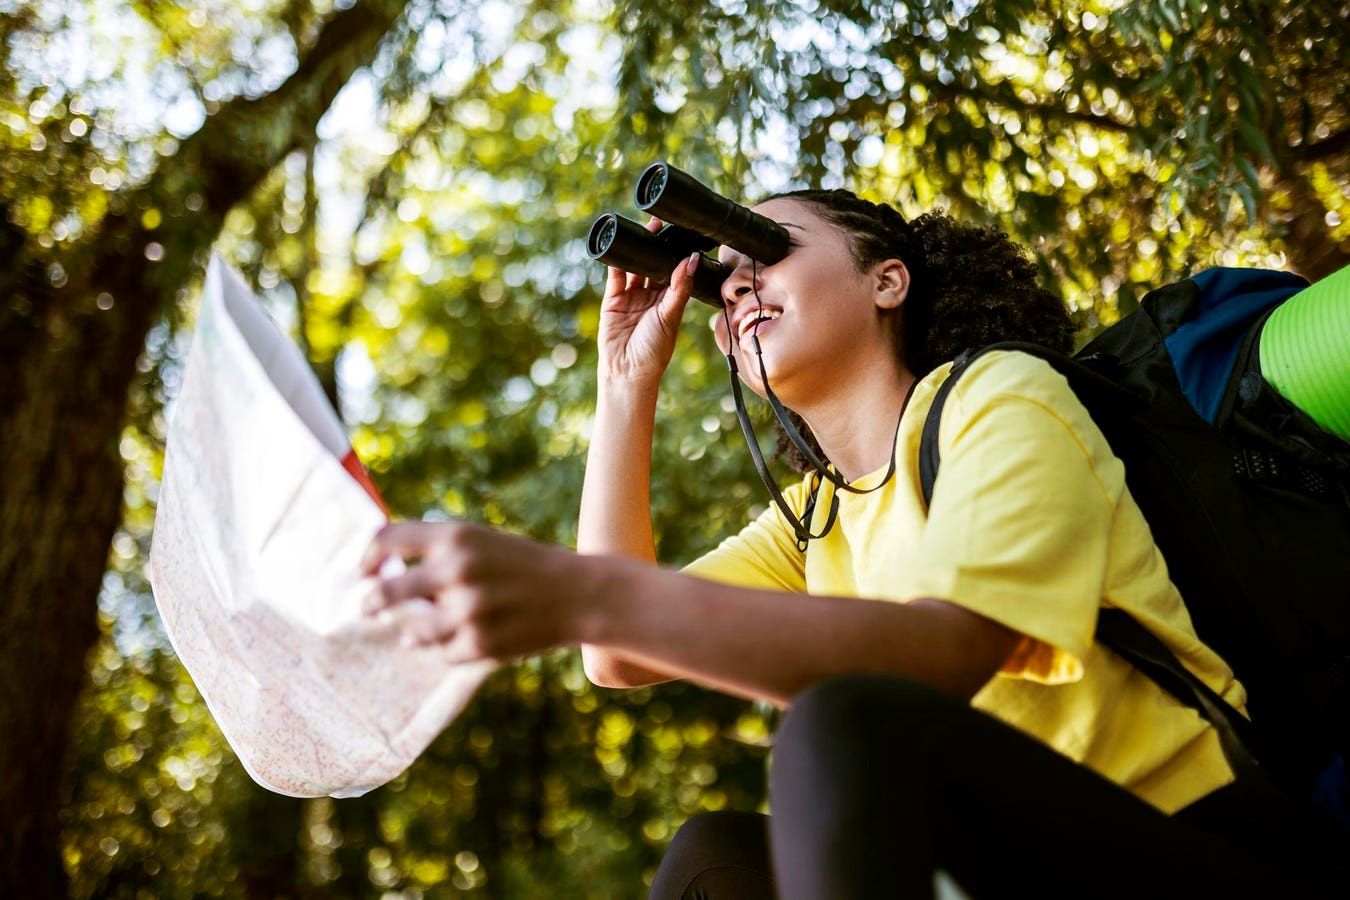 Birdwatching Can Improve Mental Health And Reduce Distress In Students